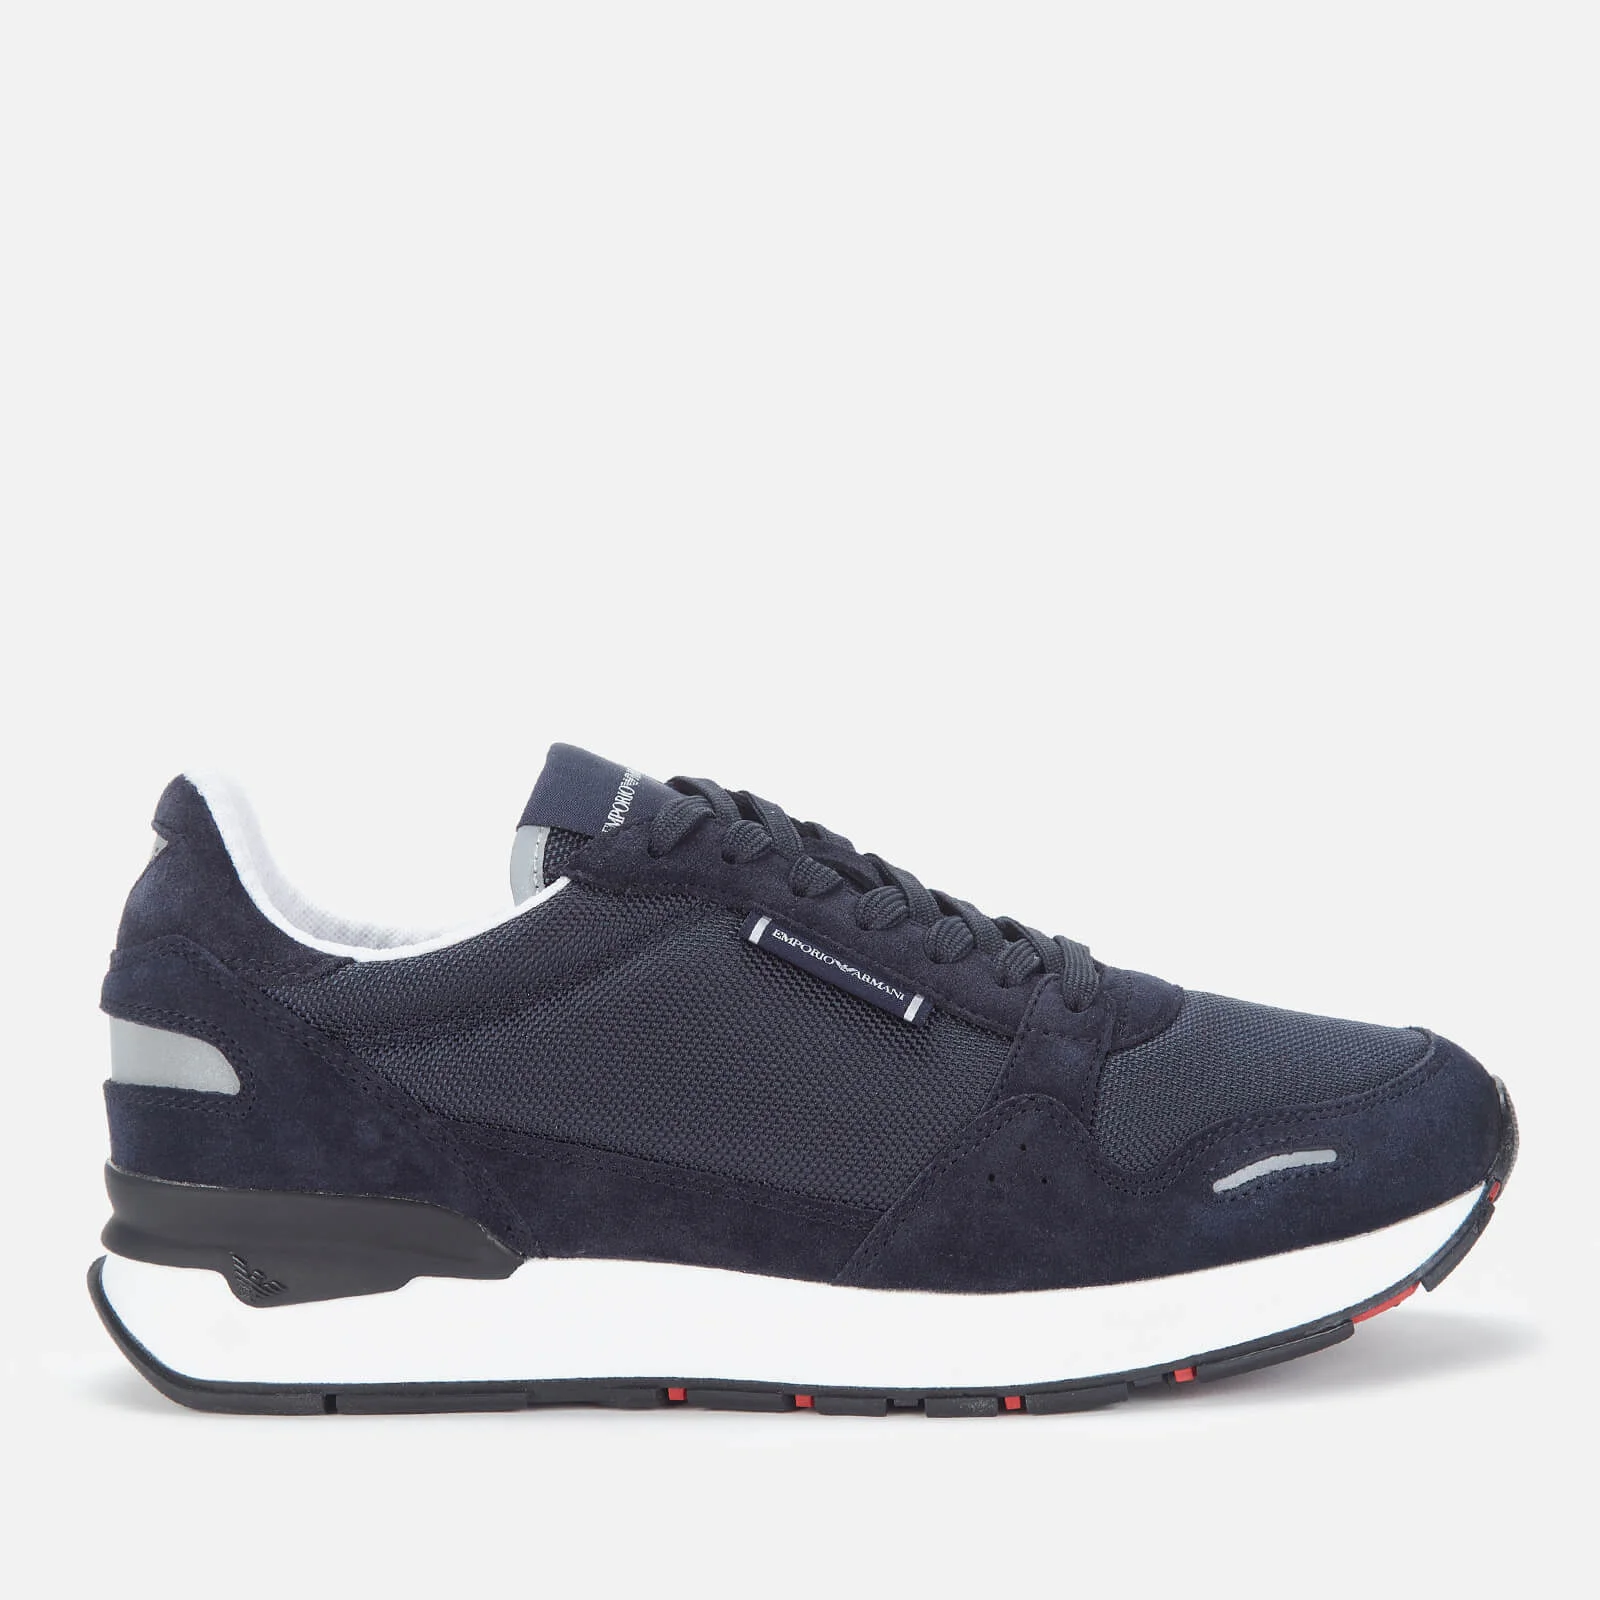 Emporio Armani Men's Suede/Mesh Running Style Trainers - Navy/Midnight Image 1